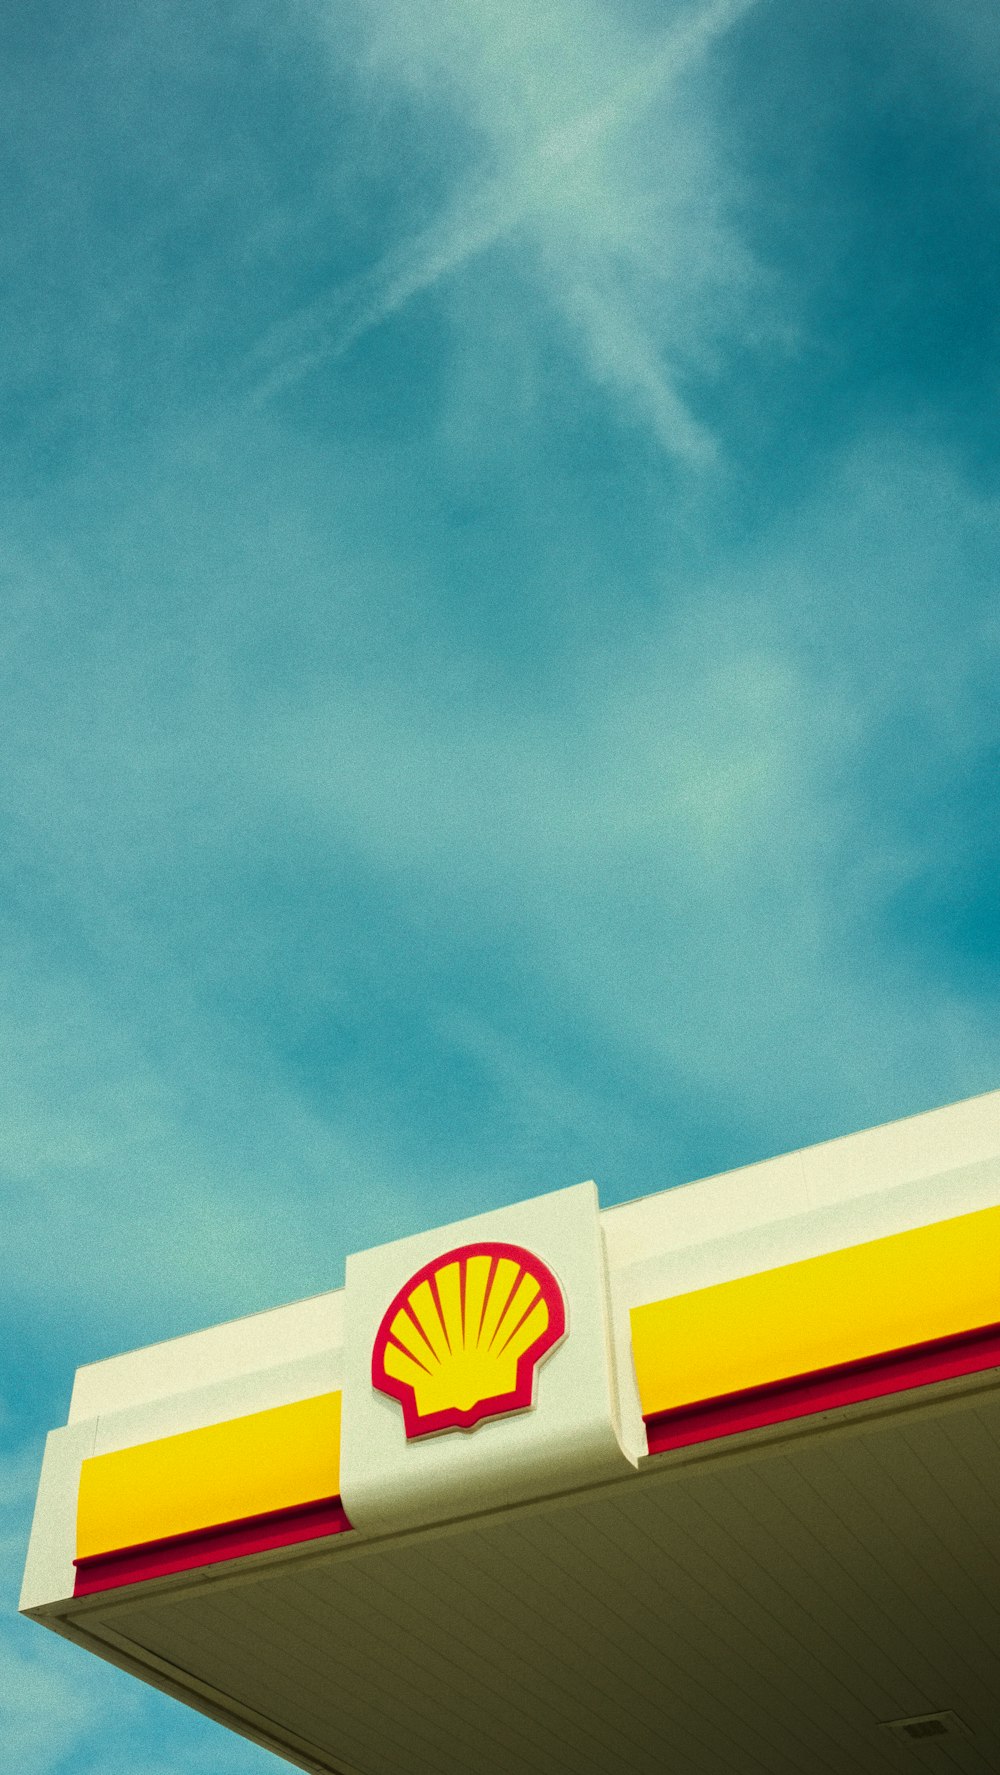 a shell gas station with a blue sky in the background